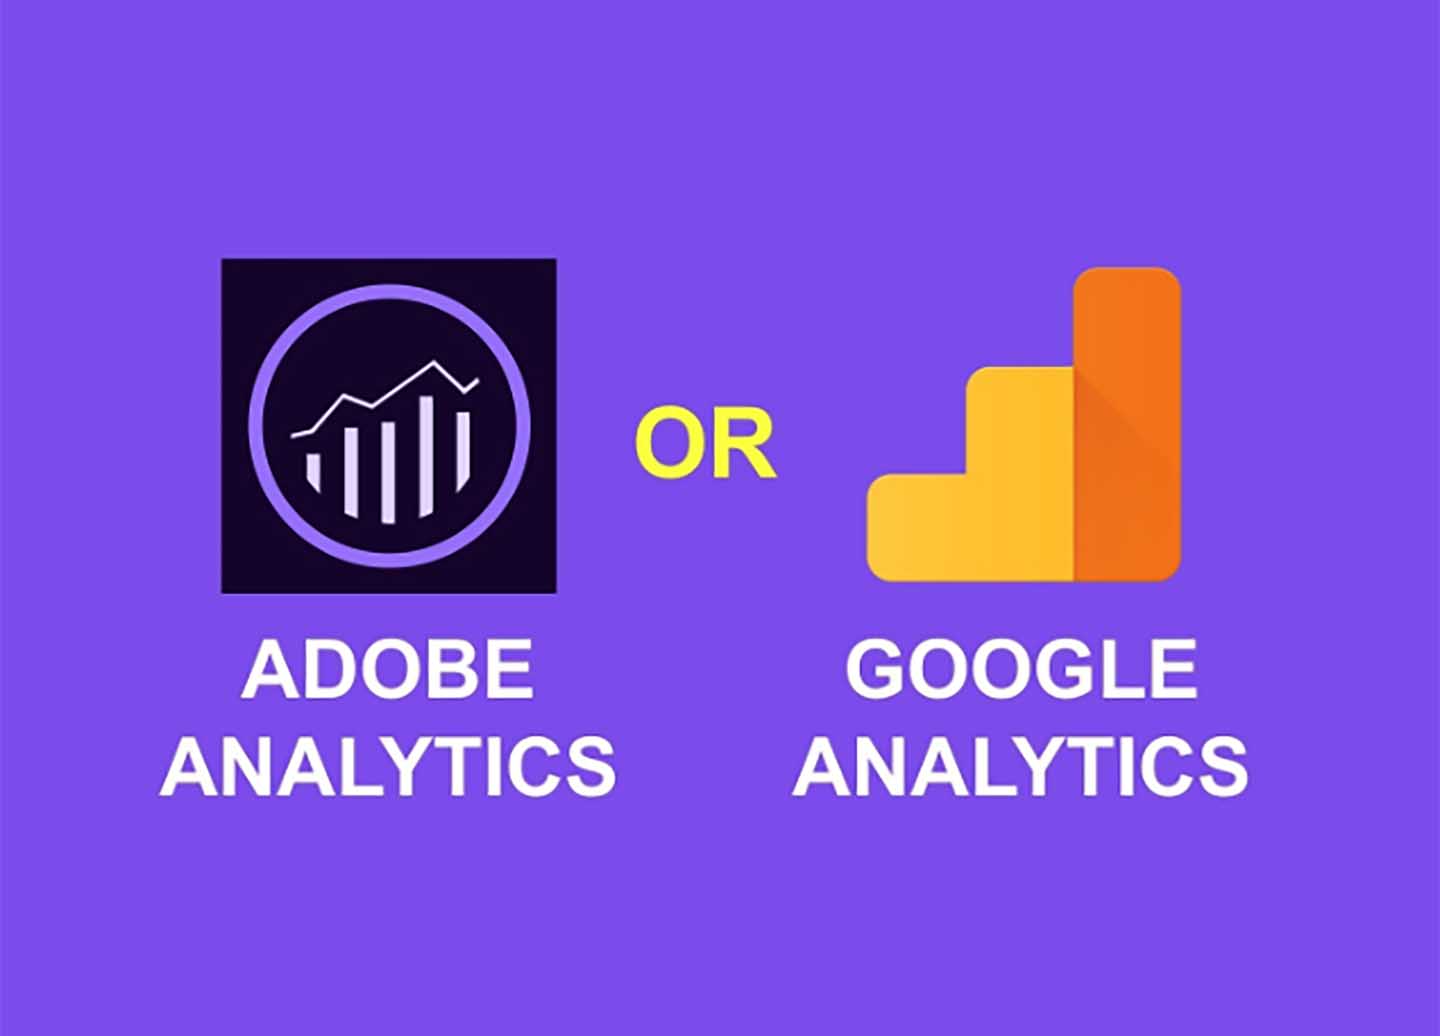 What is the difference between Adobe Analytics and Google Analytics, and which should I use for my business?